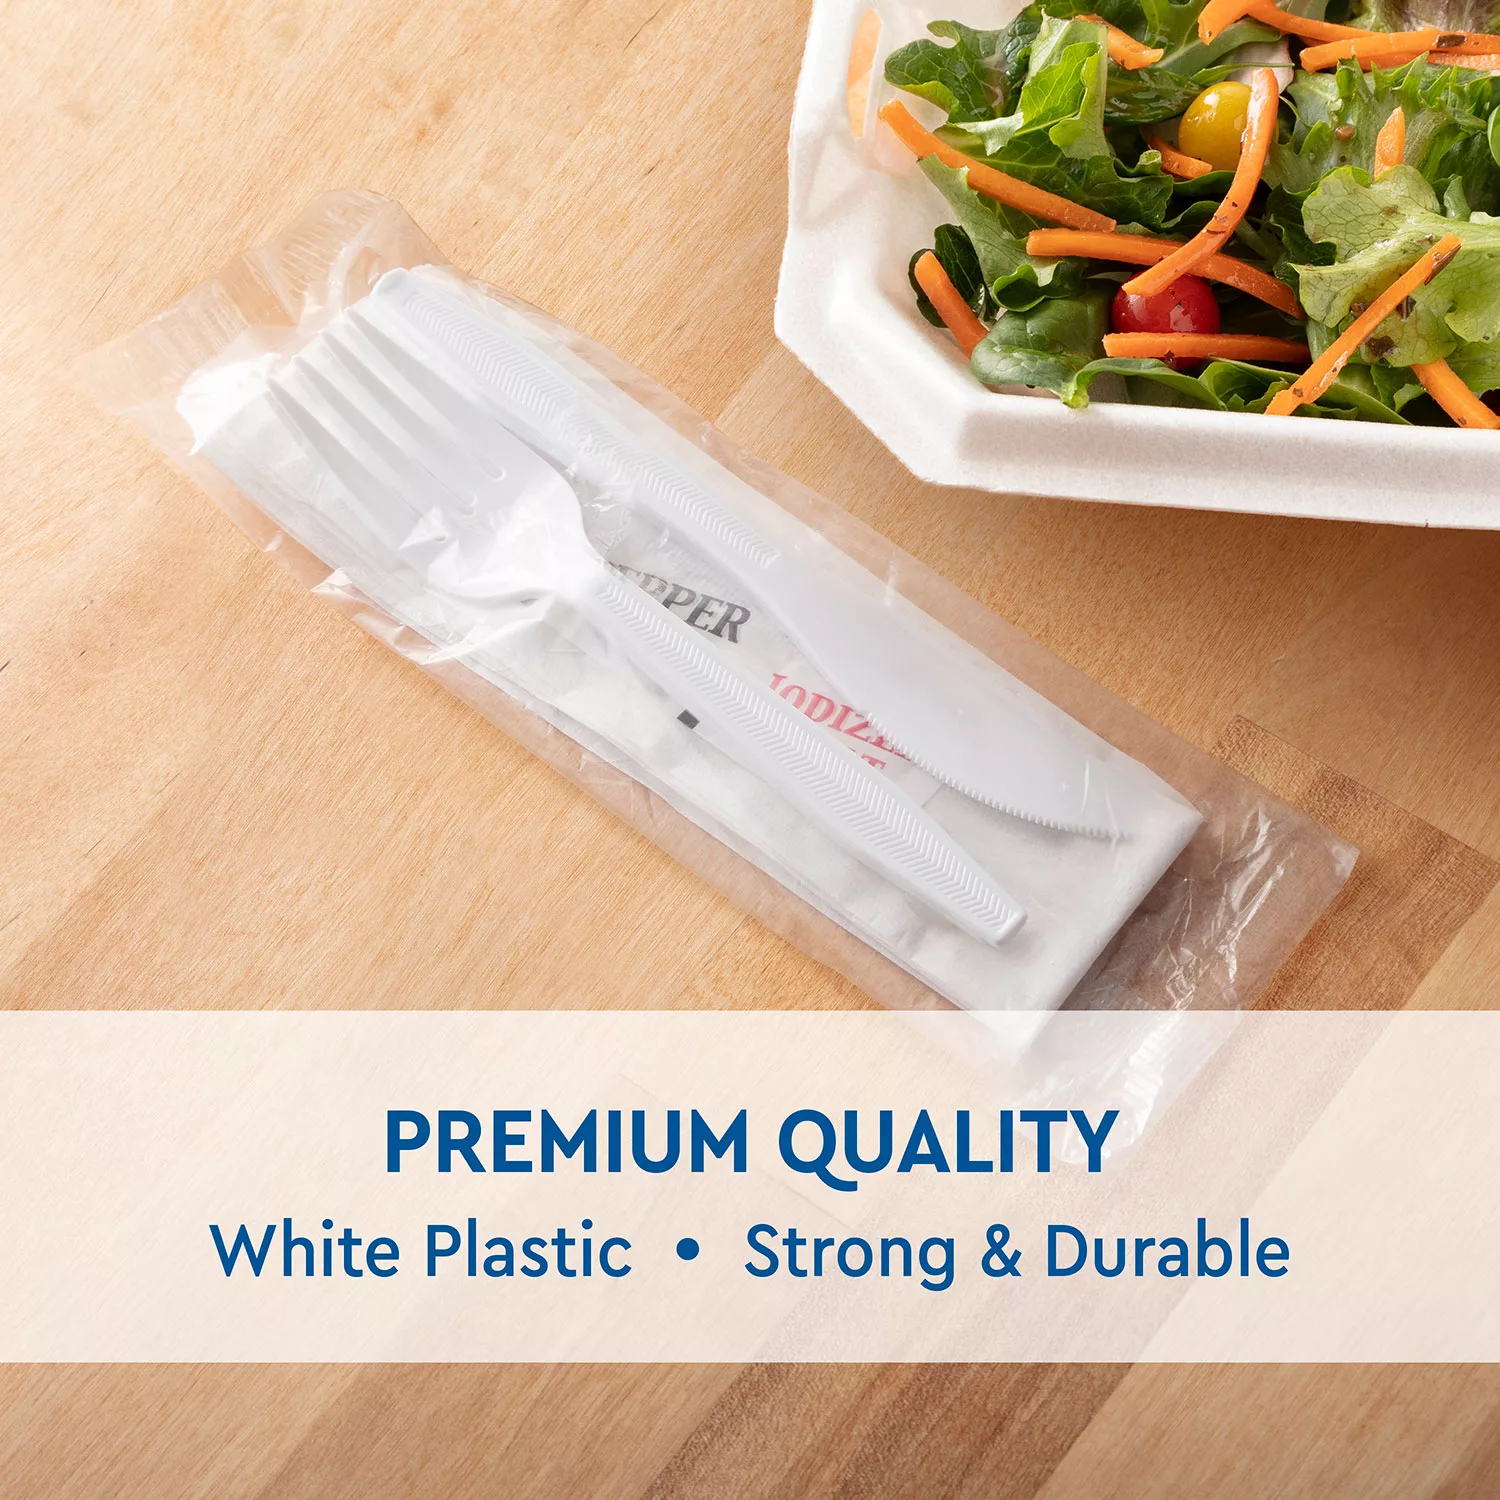 Member's Mark Plastic Cutlery Packets, White - 200 count